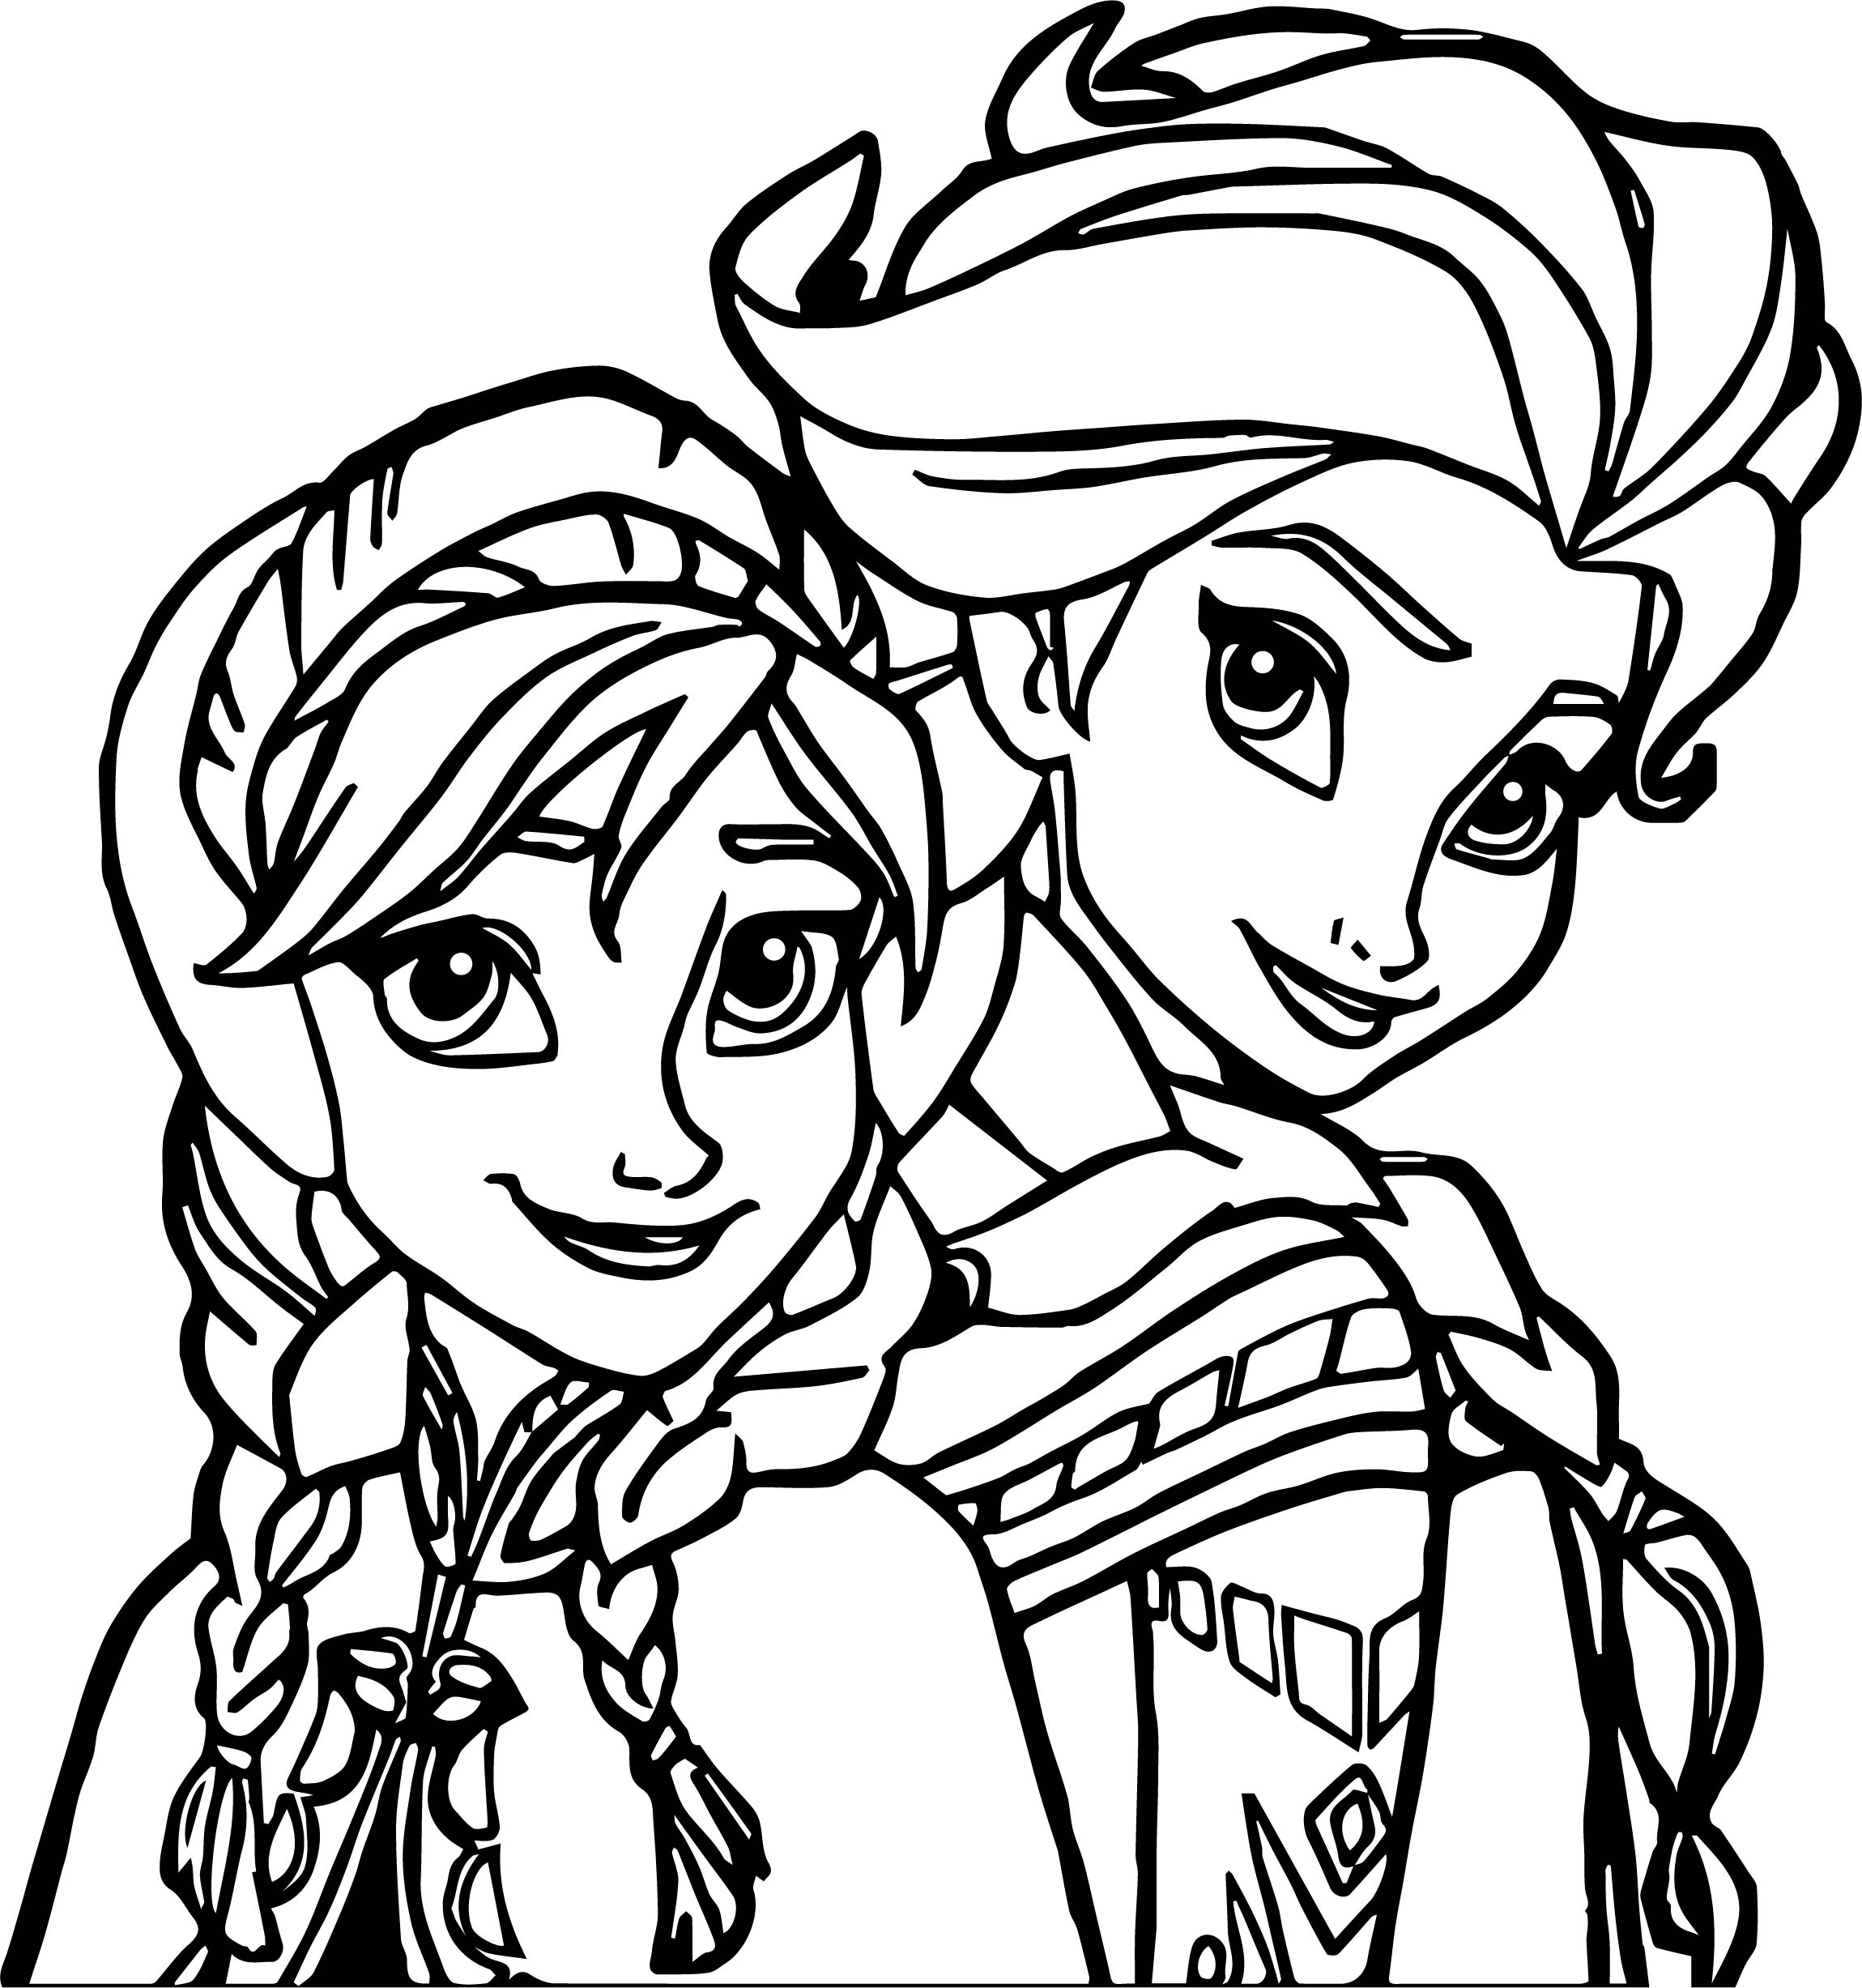 Elsa Coloring Pages | Free download on ClipArtMag